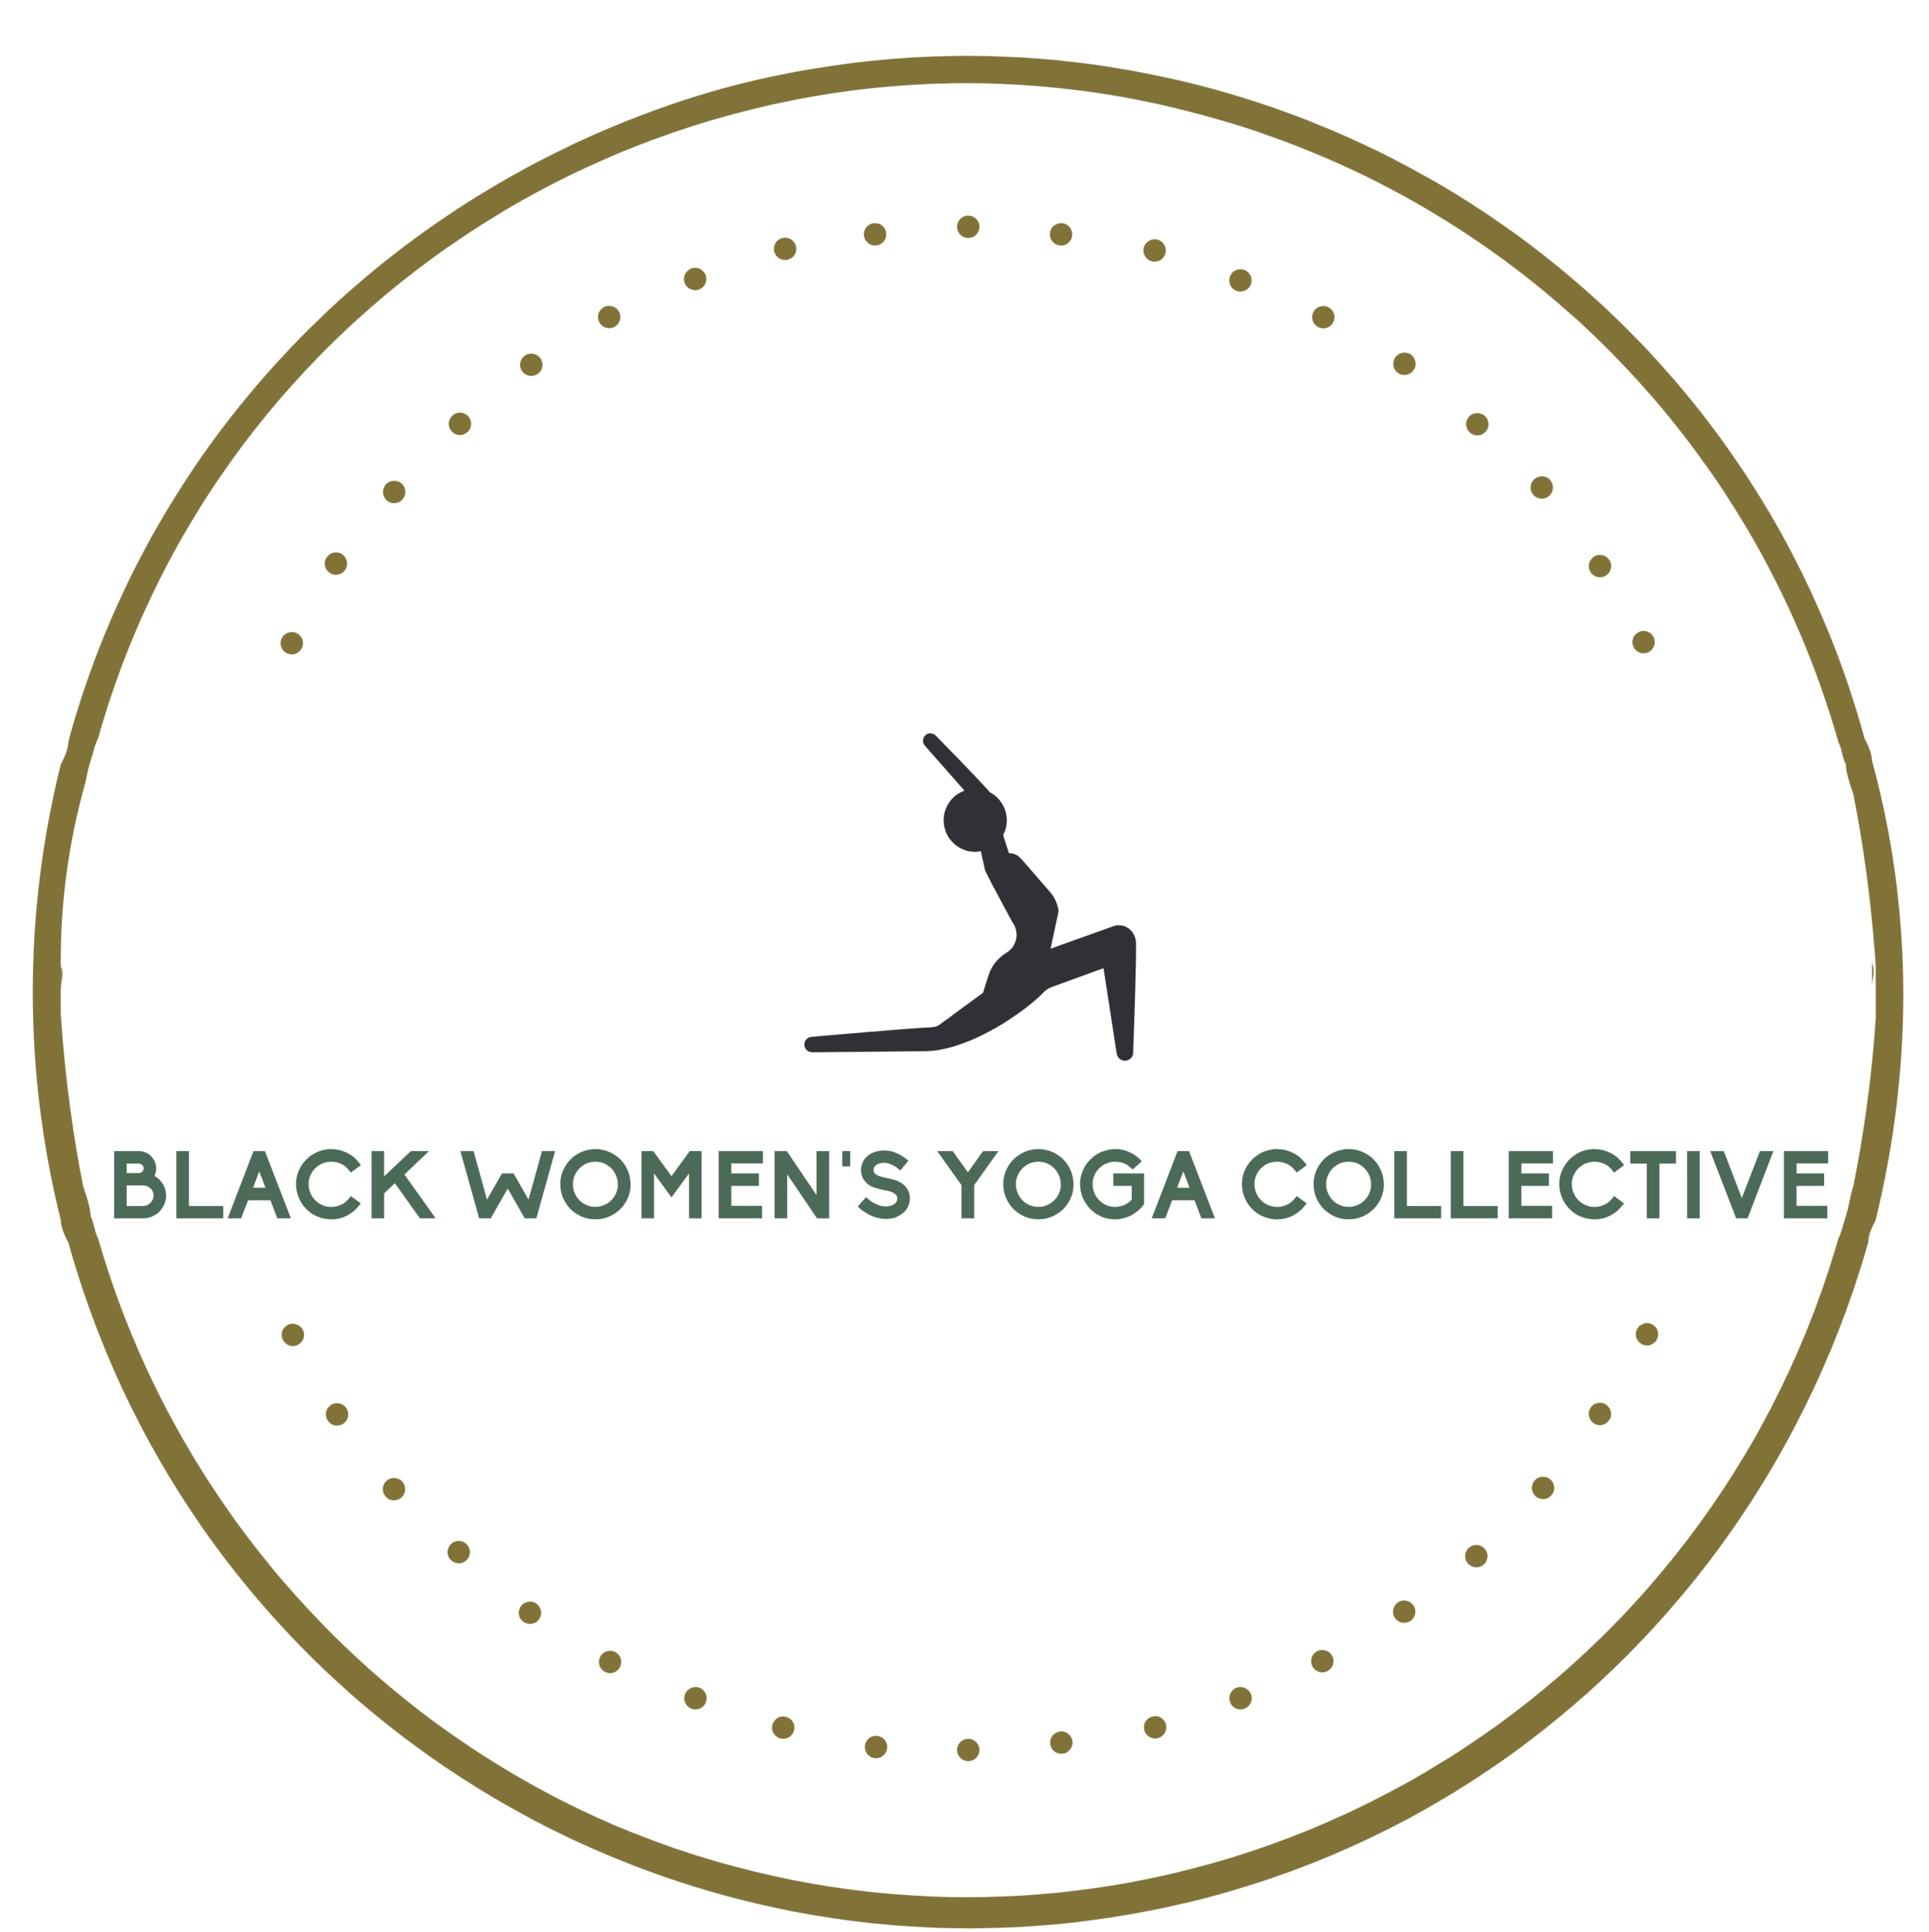 About Us — The Black Women's Yoga Collective